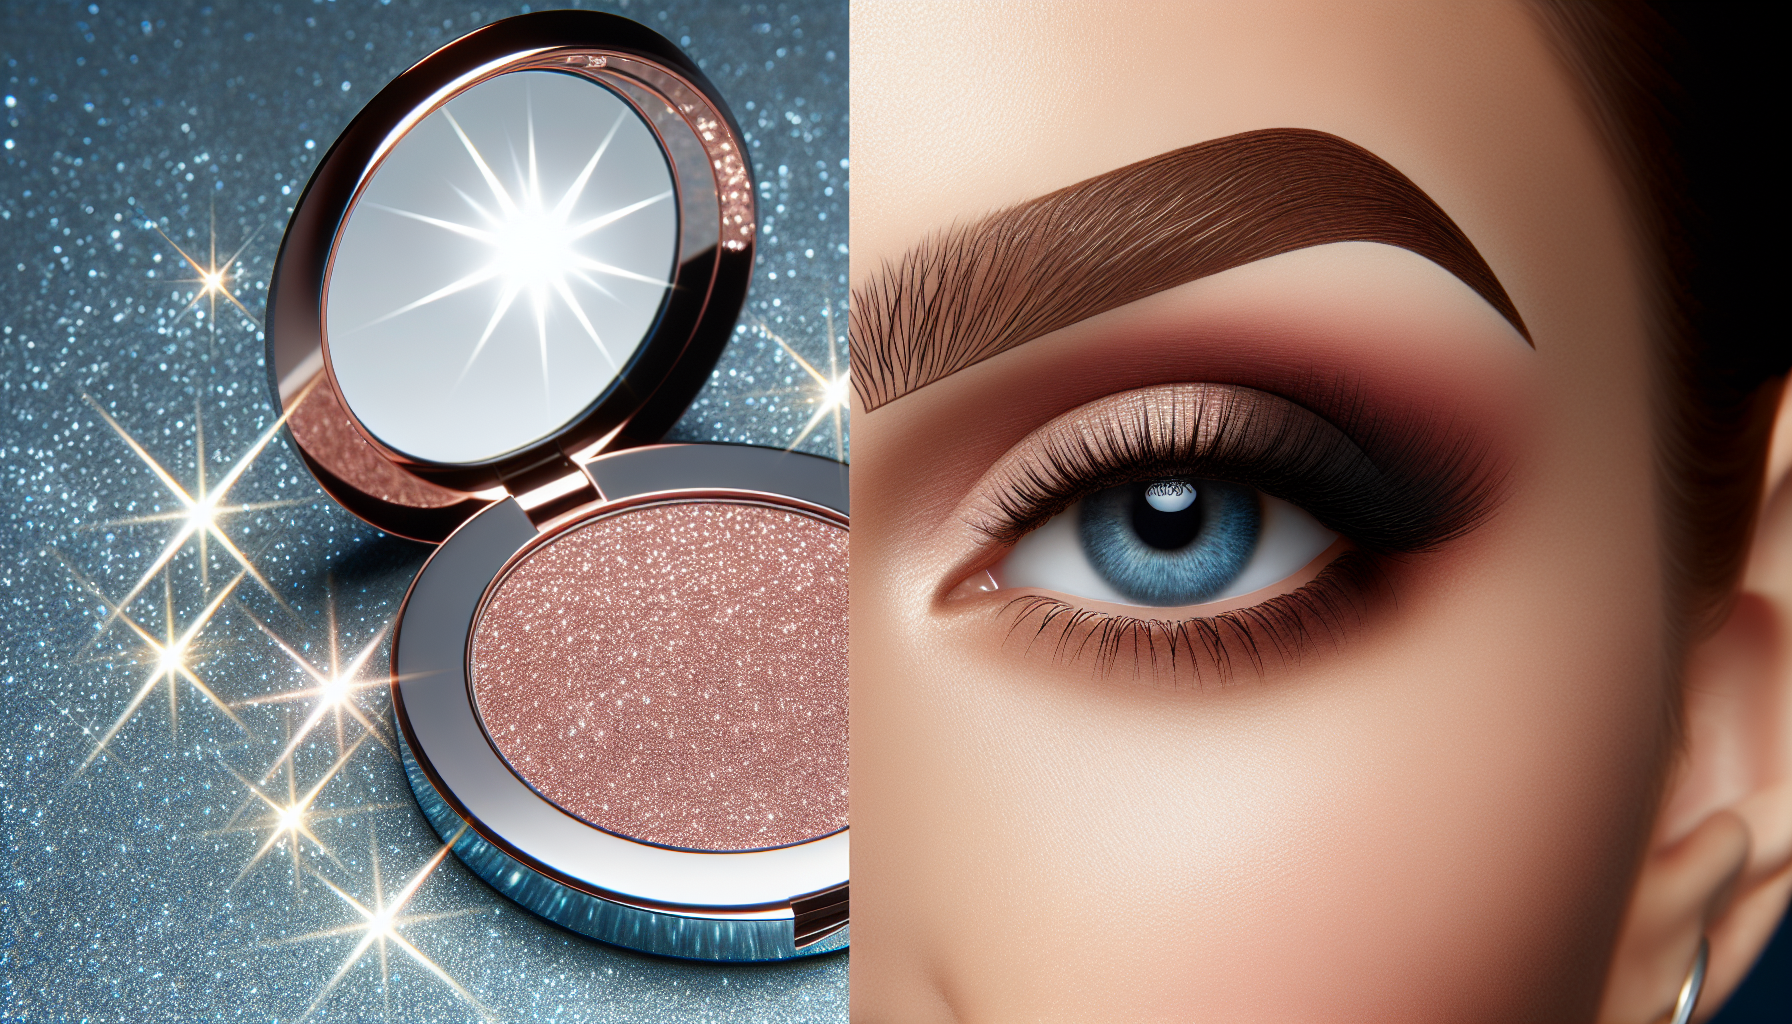 pmu vs daily makeup a cost and time analysis